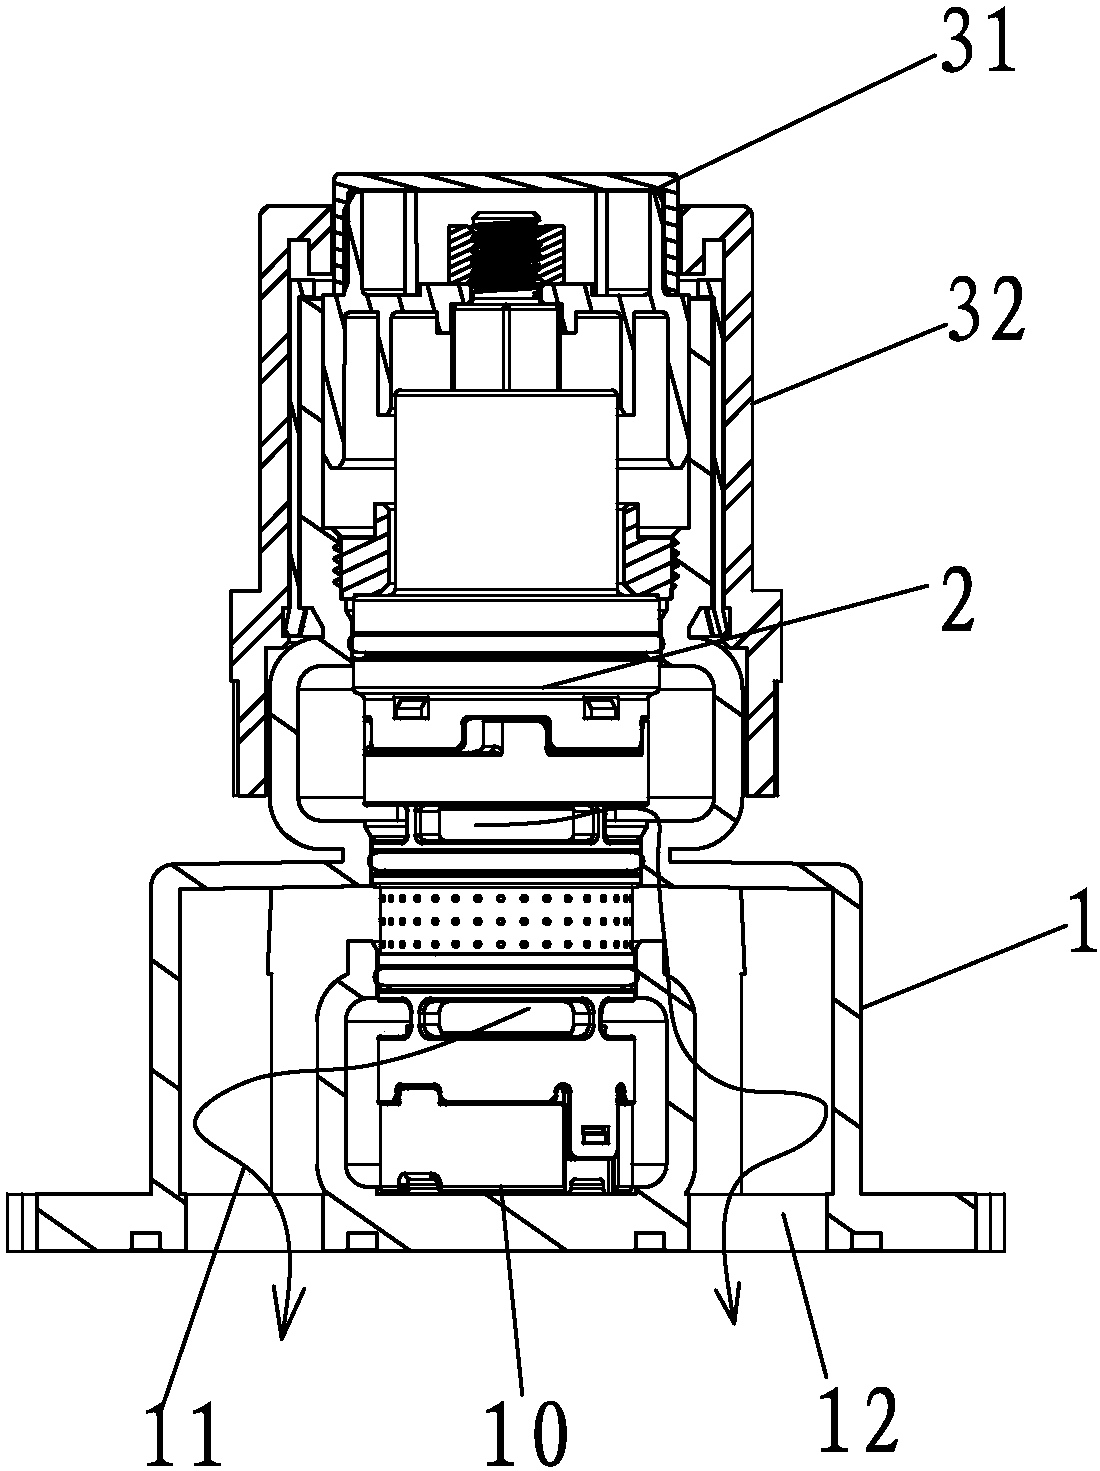 A multi-stage single-double control flow regulating switch valve